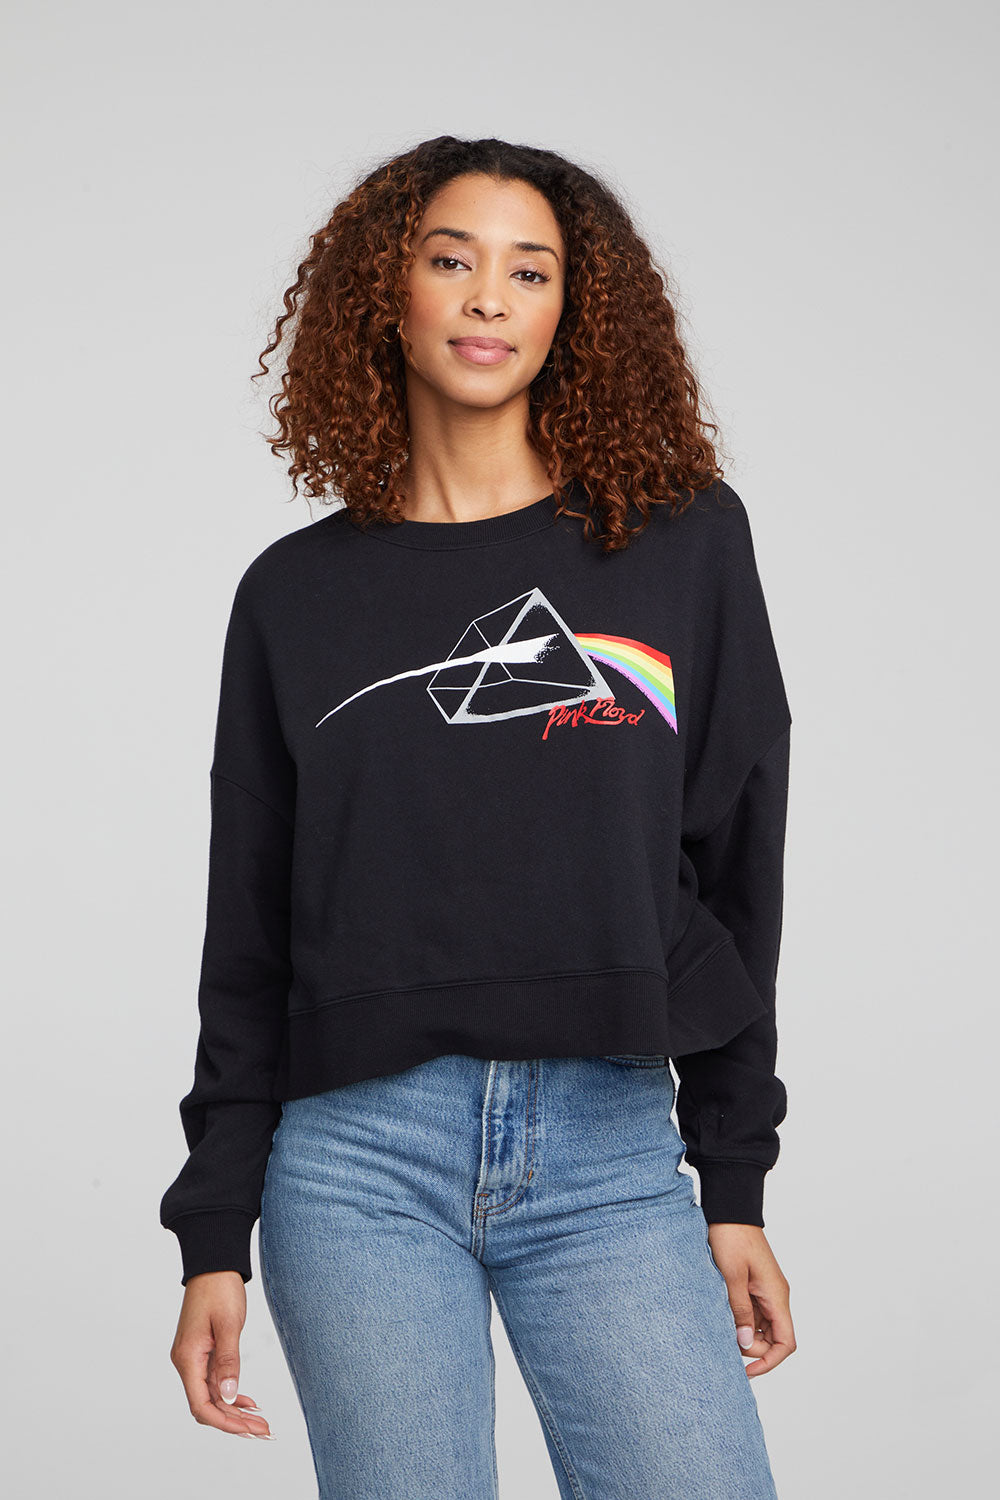 Pink Floyd Dark Side of the Moon Long Sleeve WOMENS chaserbrand